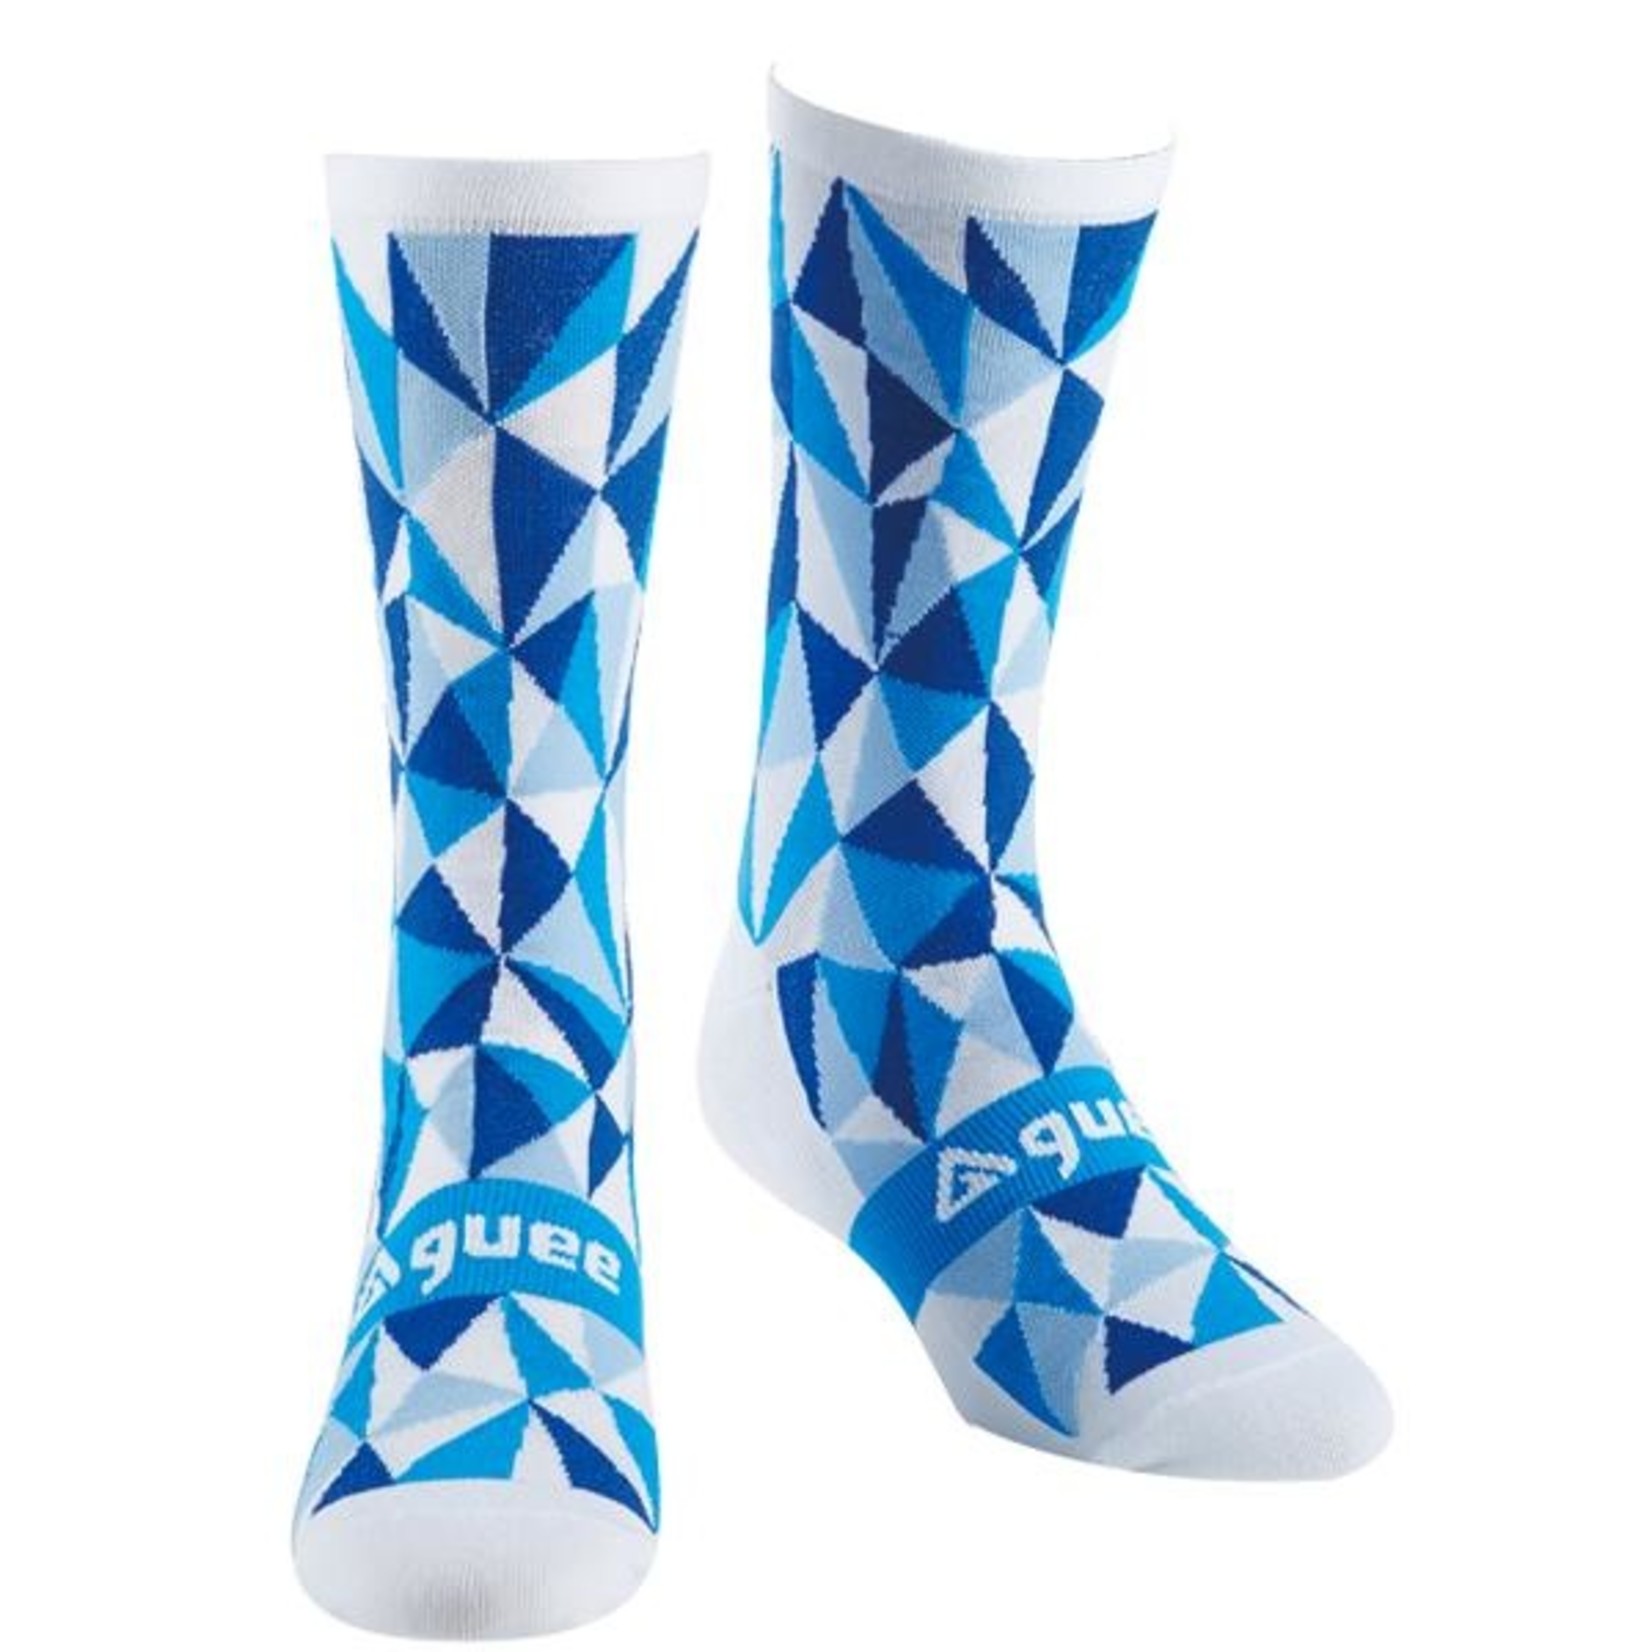 Guee Guee Socks - Geo Racefit - White & Blue - Size - Medium-Large